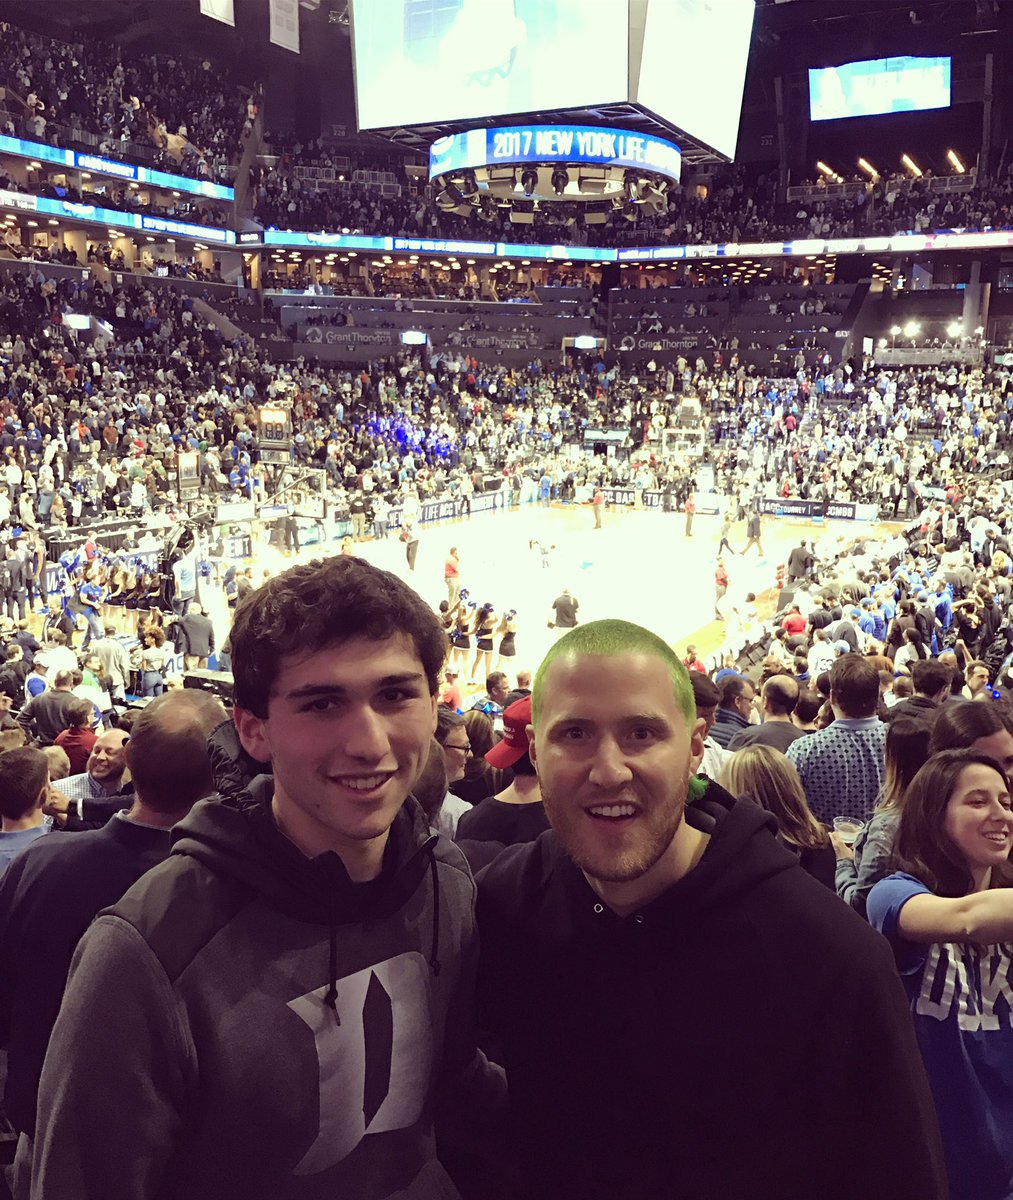 Mike Posner with his cousin Zach at a Duke Blue Devils basketball game in New York March 10, 2017
photo by Zach Samberg
